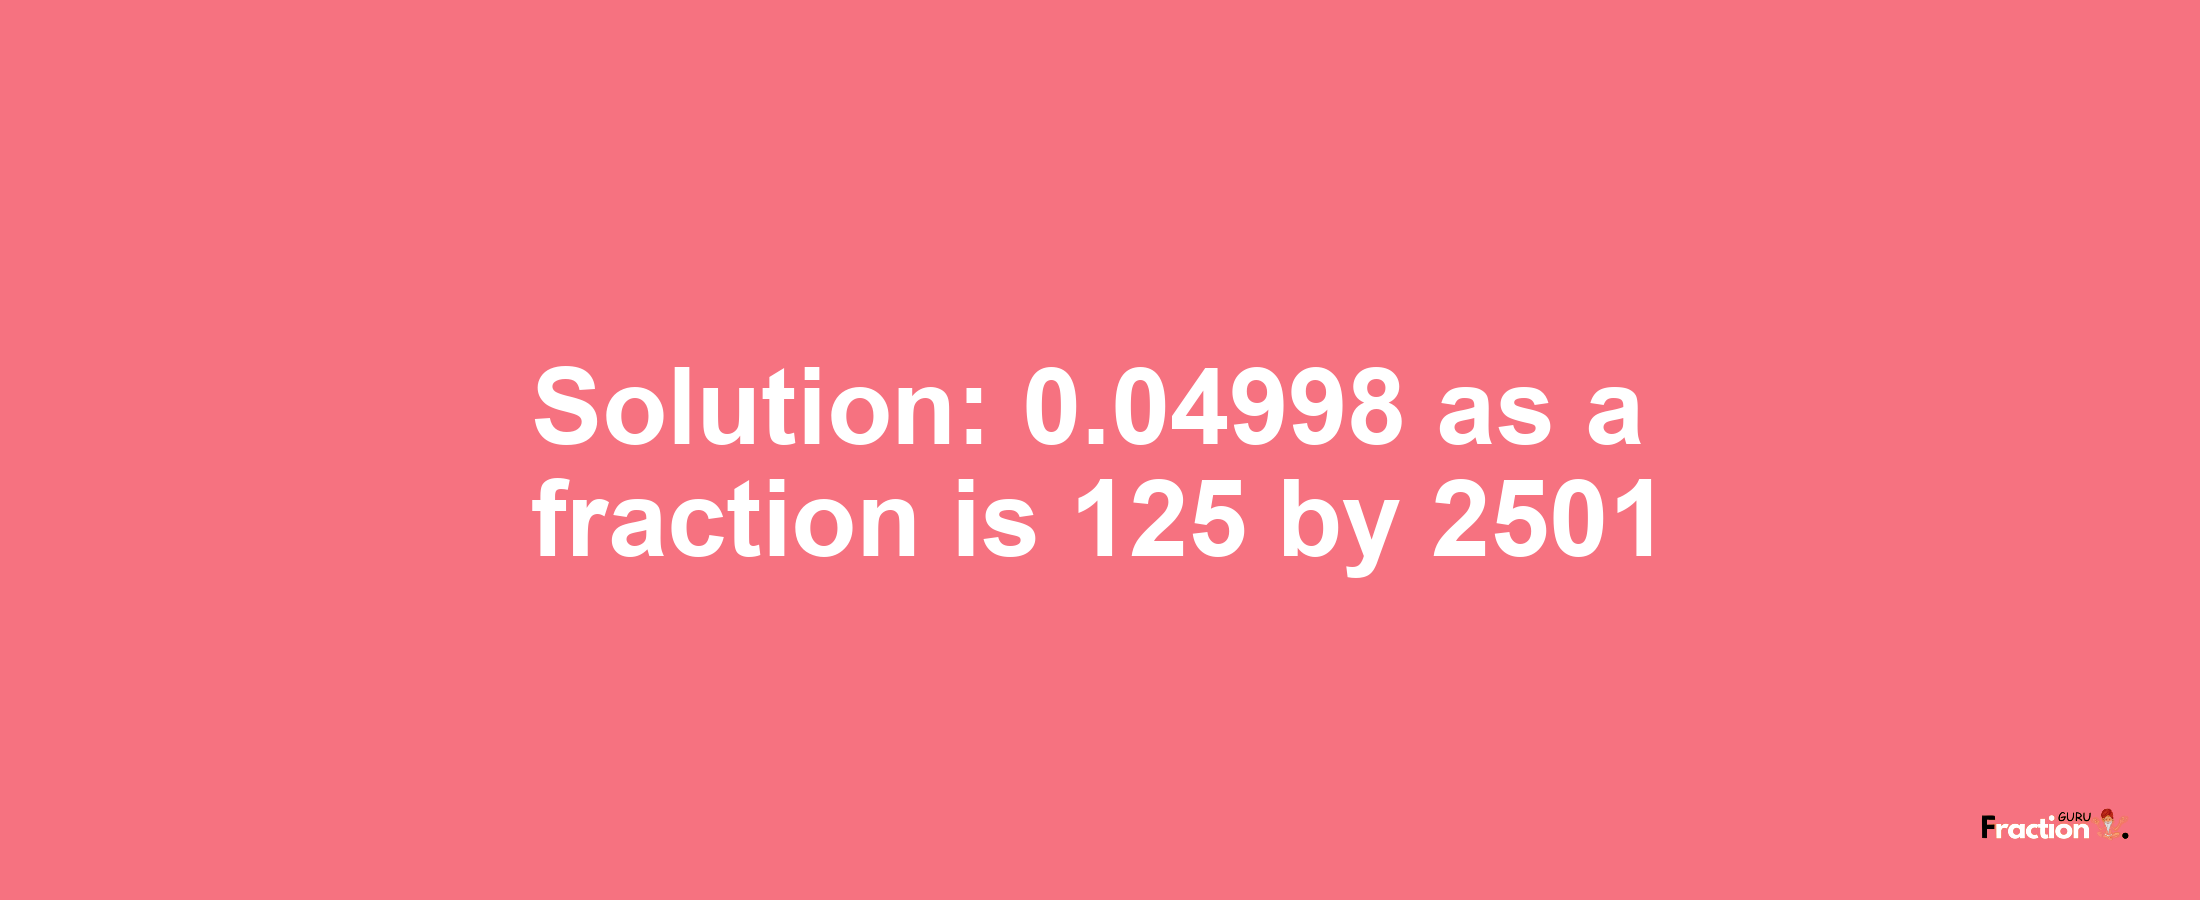 Solution:0.04998 as a fraction is 125/2501